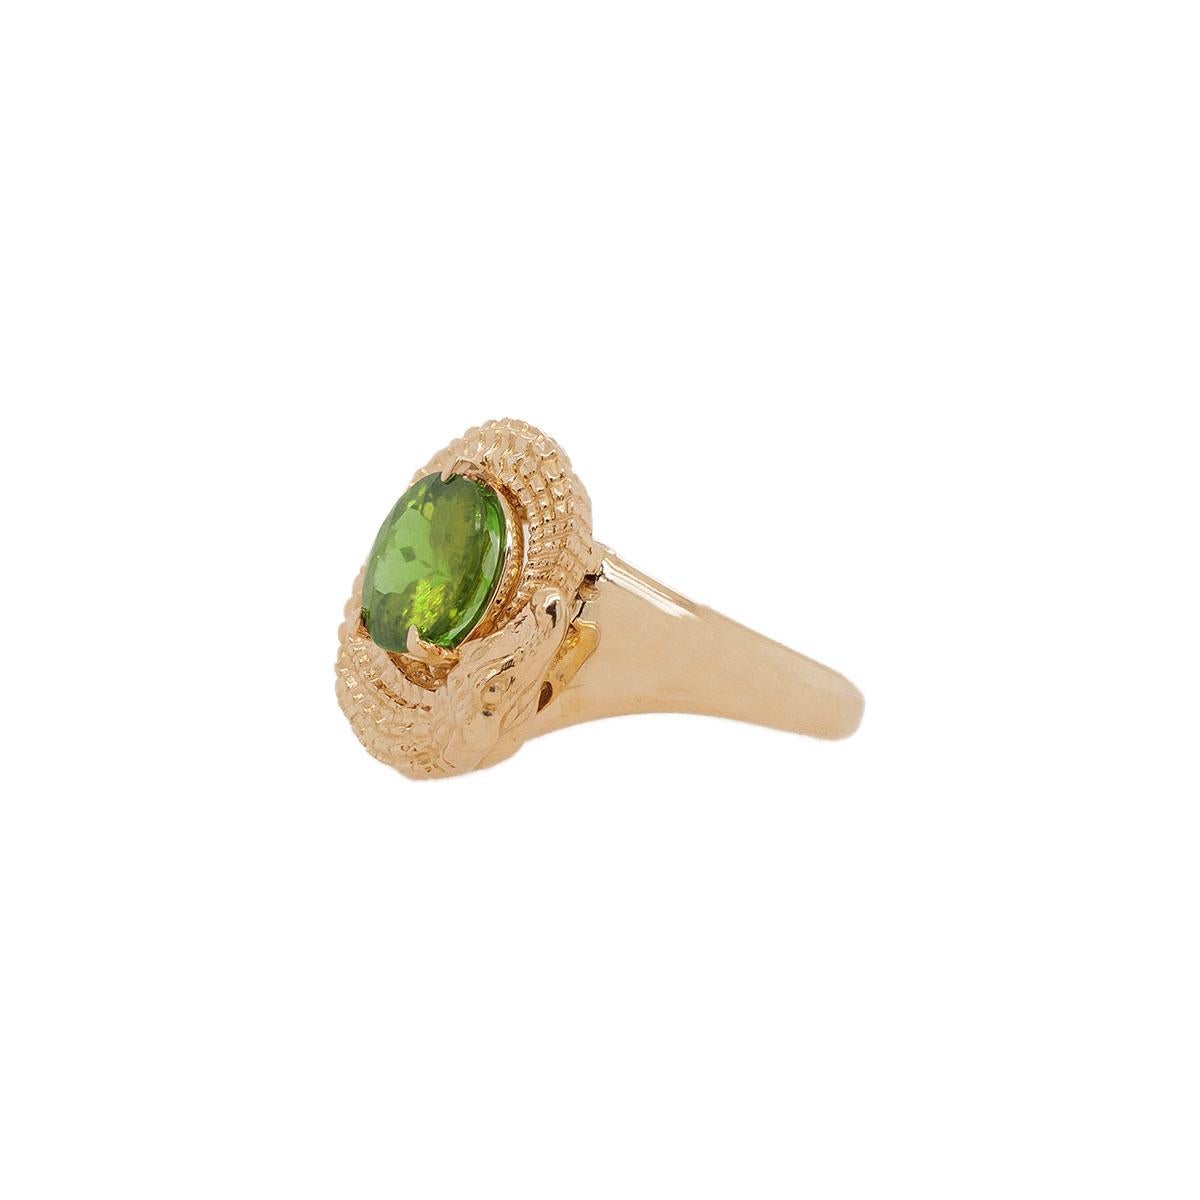 This unique ring design features a center round tourmaline stone with a textured alligator eating its own tail, reminiscent of an ouroboros snake, representing the belief in reincarnation and the cosmic cycle we all live & breathe in. A piece that's